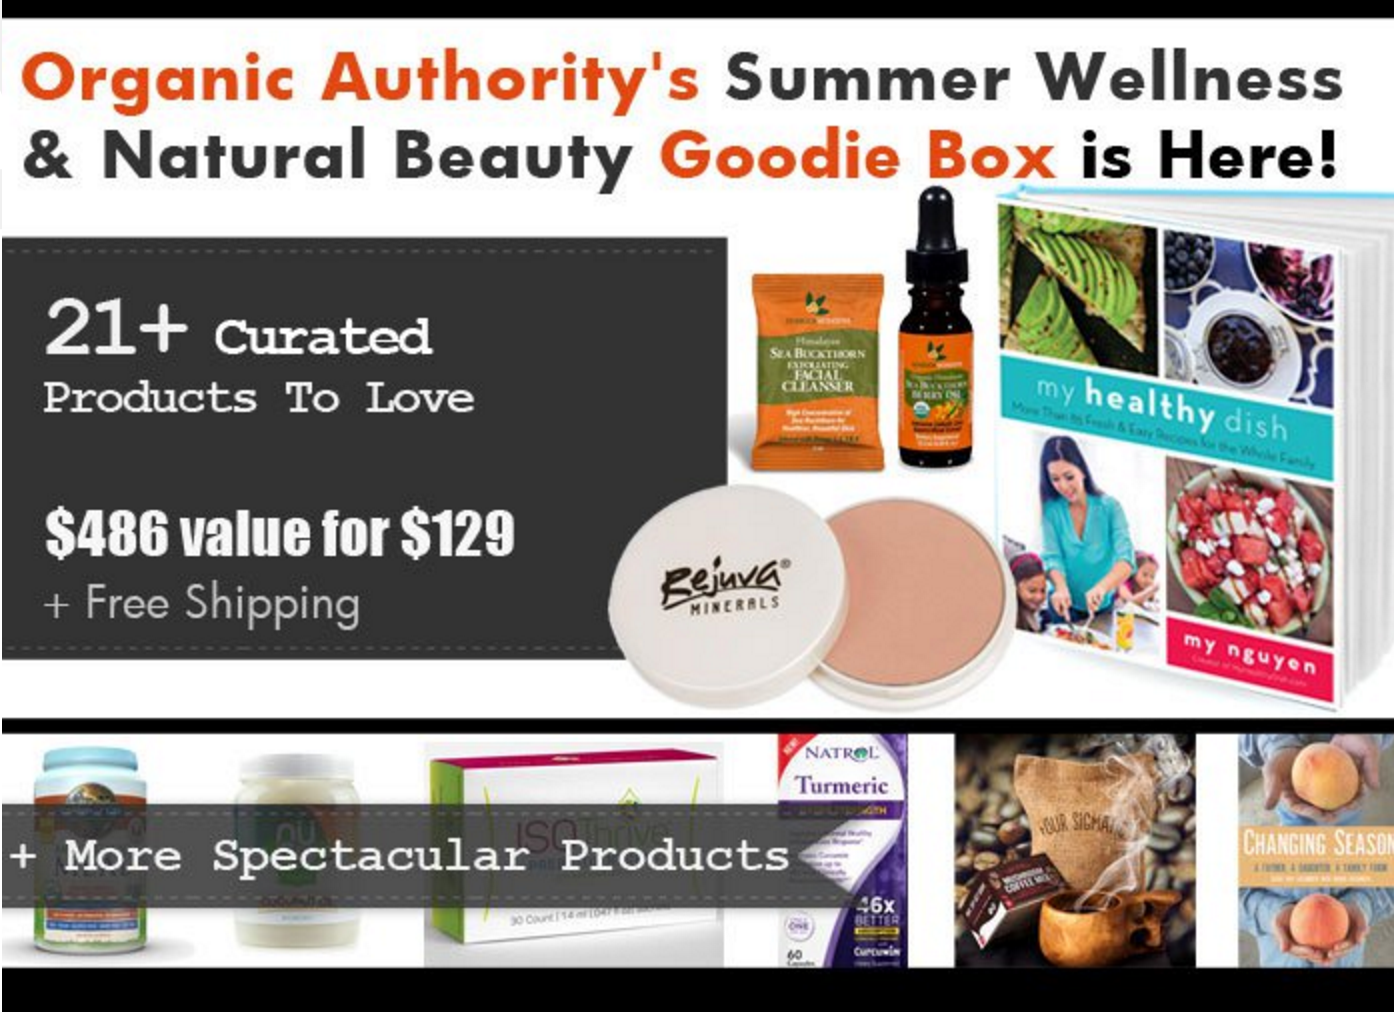 Organic Authority Summer Wellness Goodie Box Now Available!